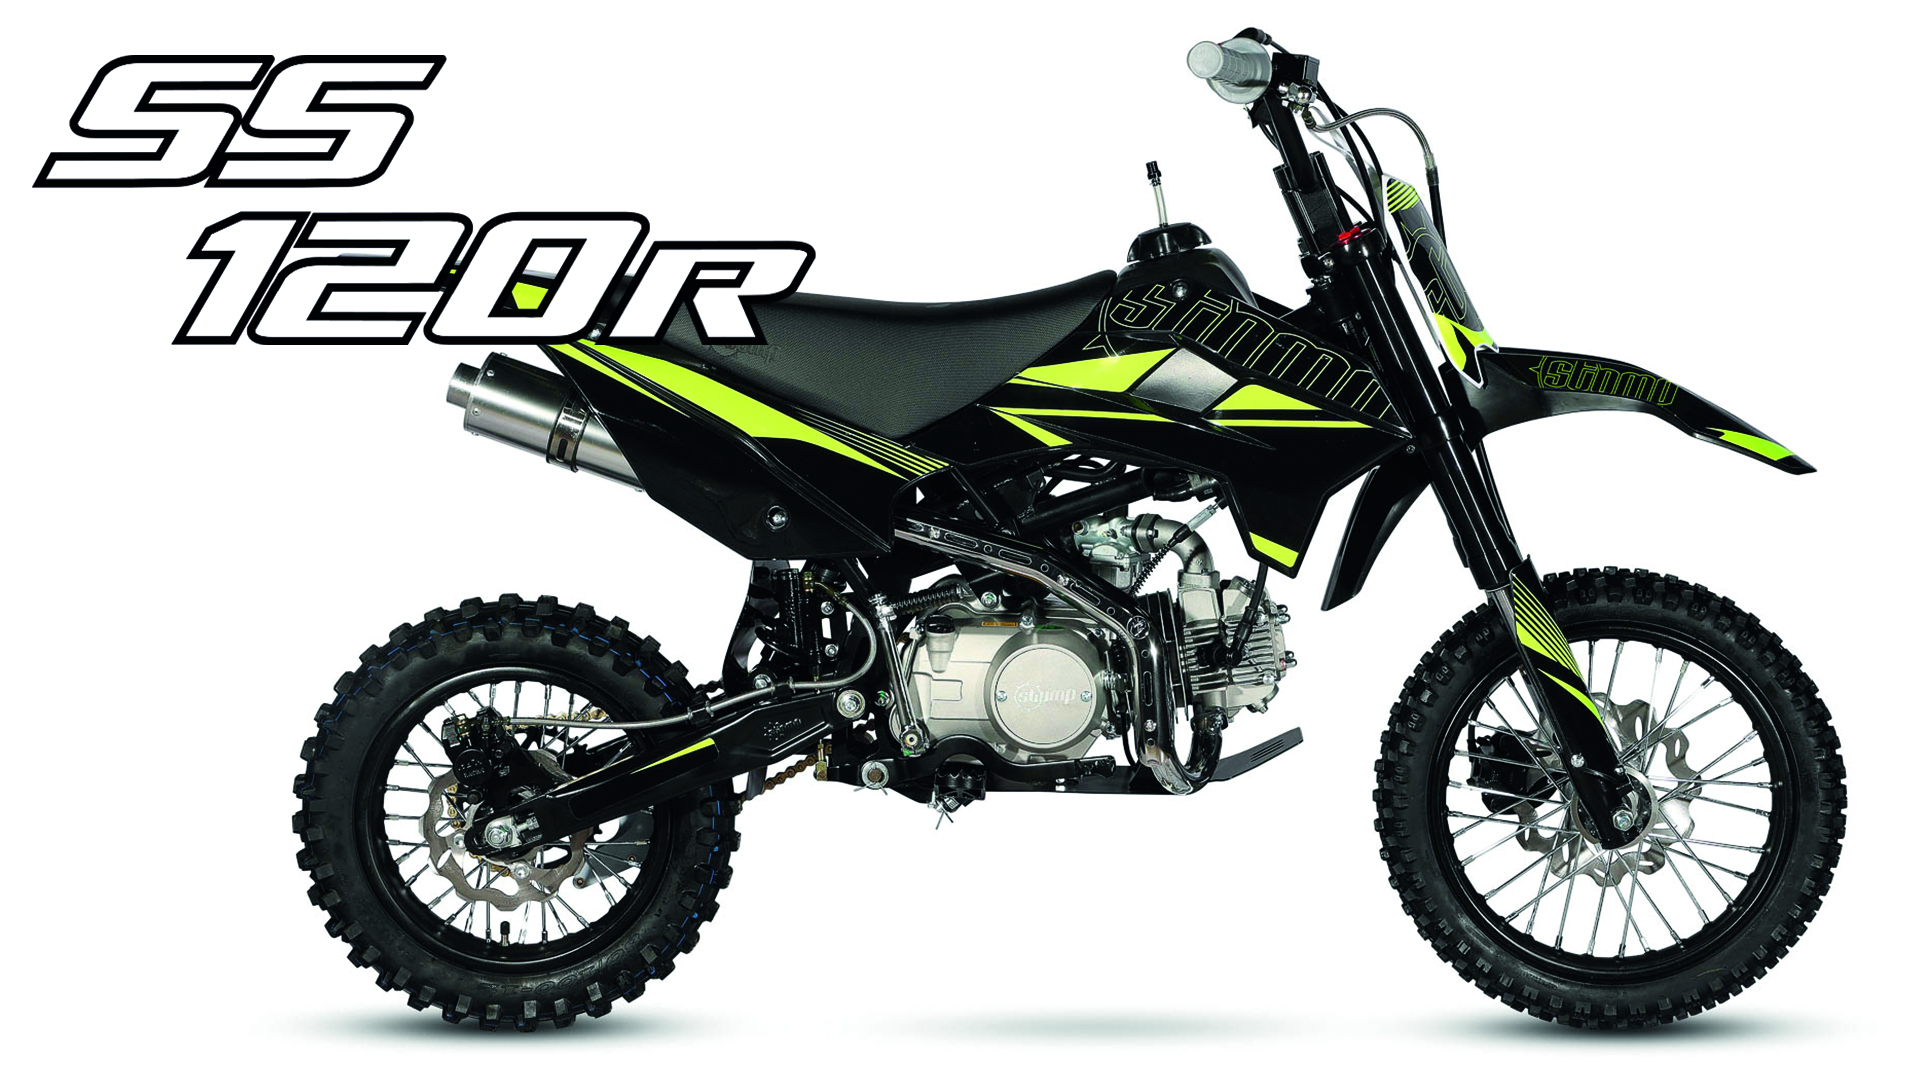 Superstomp 120 cc pit bike from Stomp